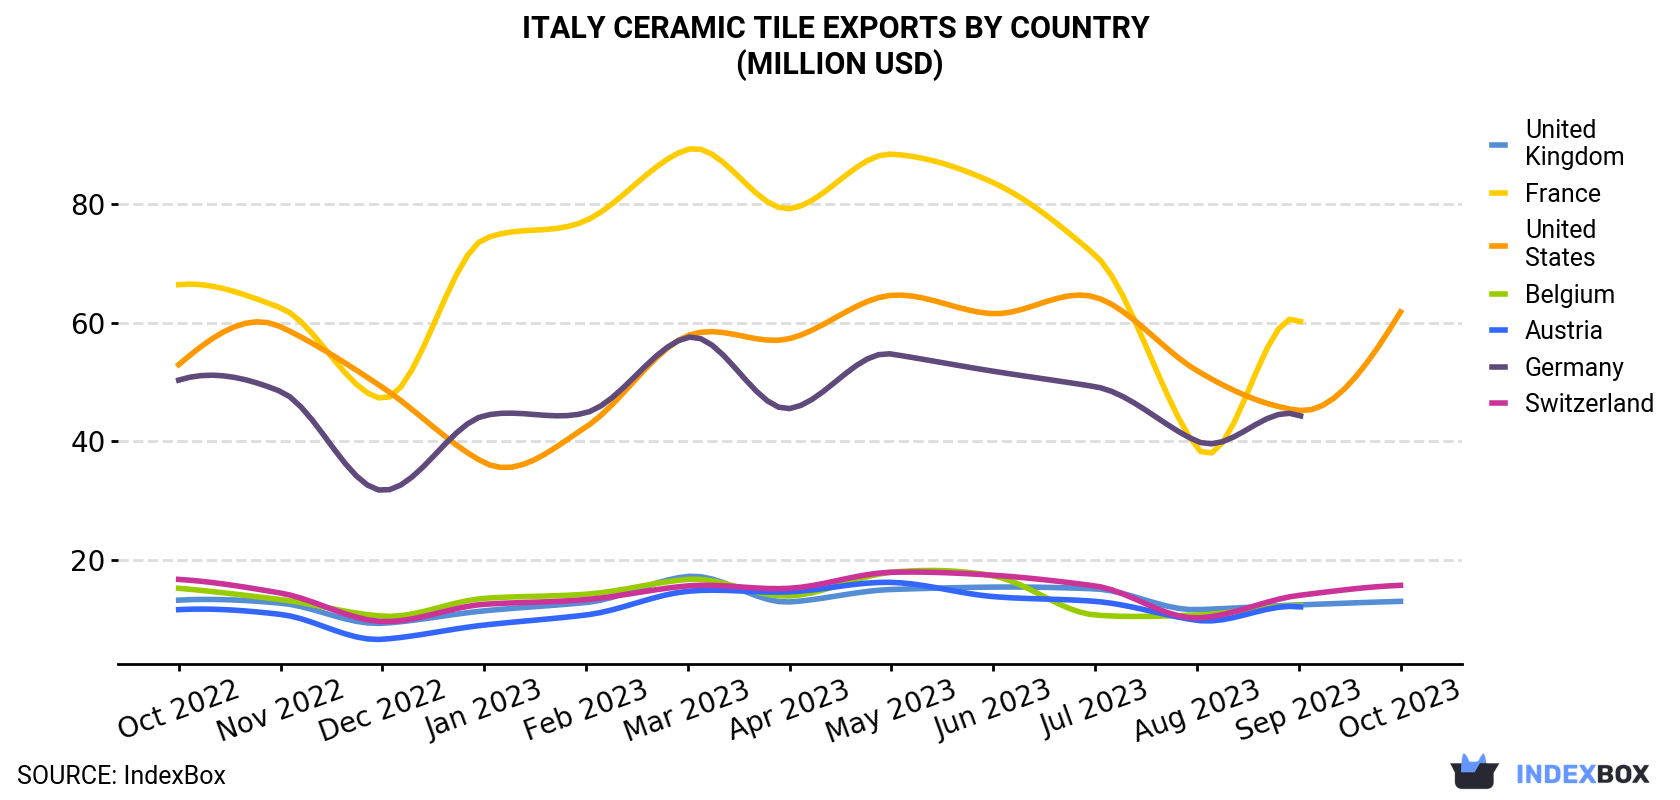 Italy Ceramic Tile Exports By Country (Million USD)